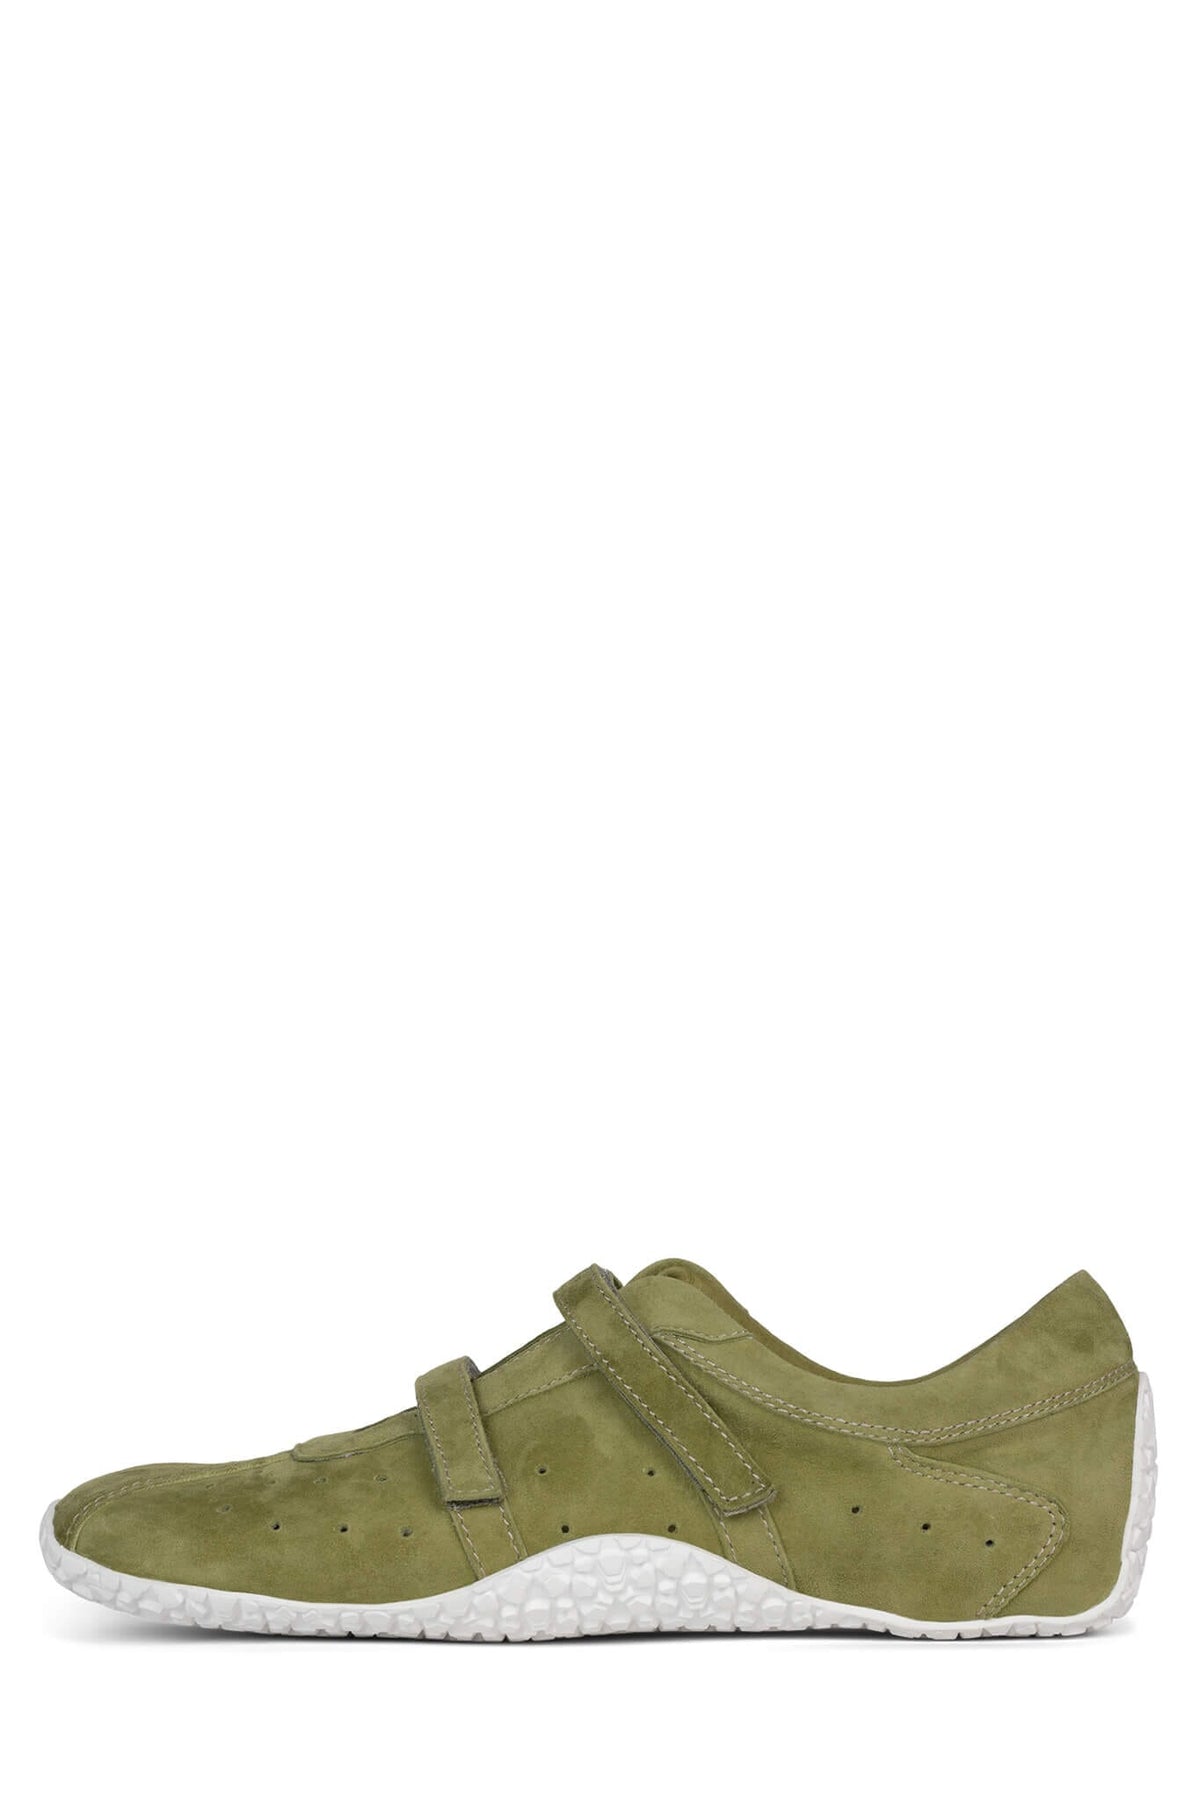 ATHLETIC DV Green Suede White 6 